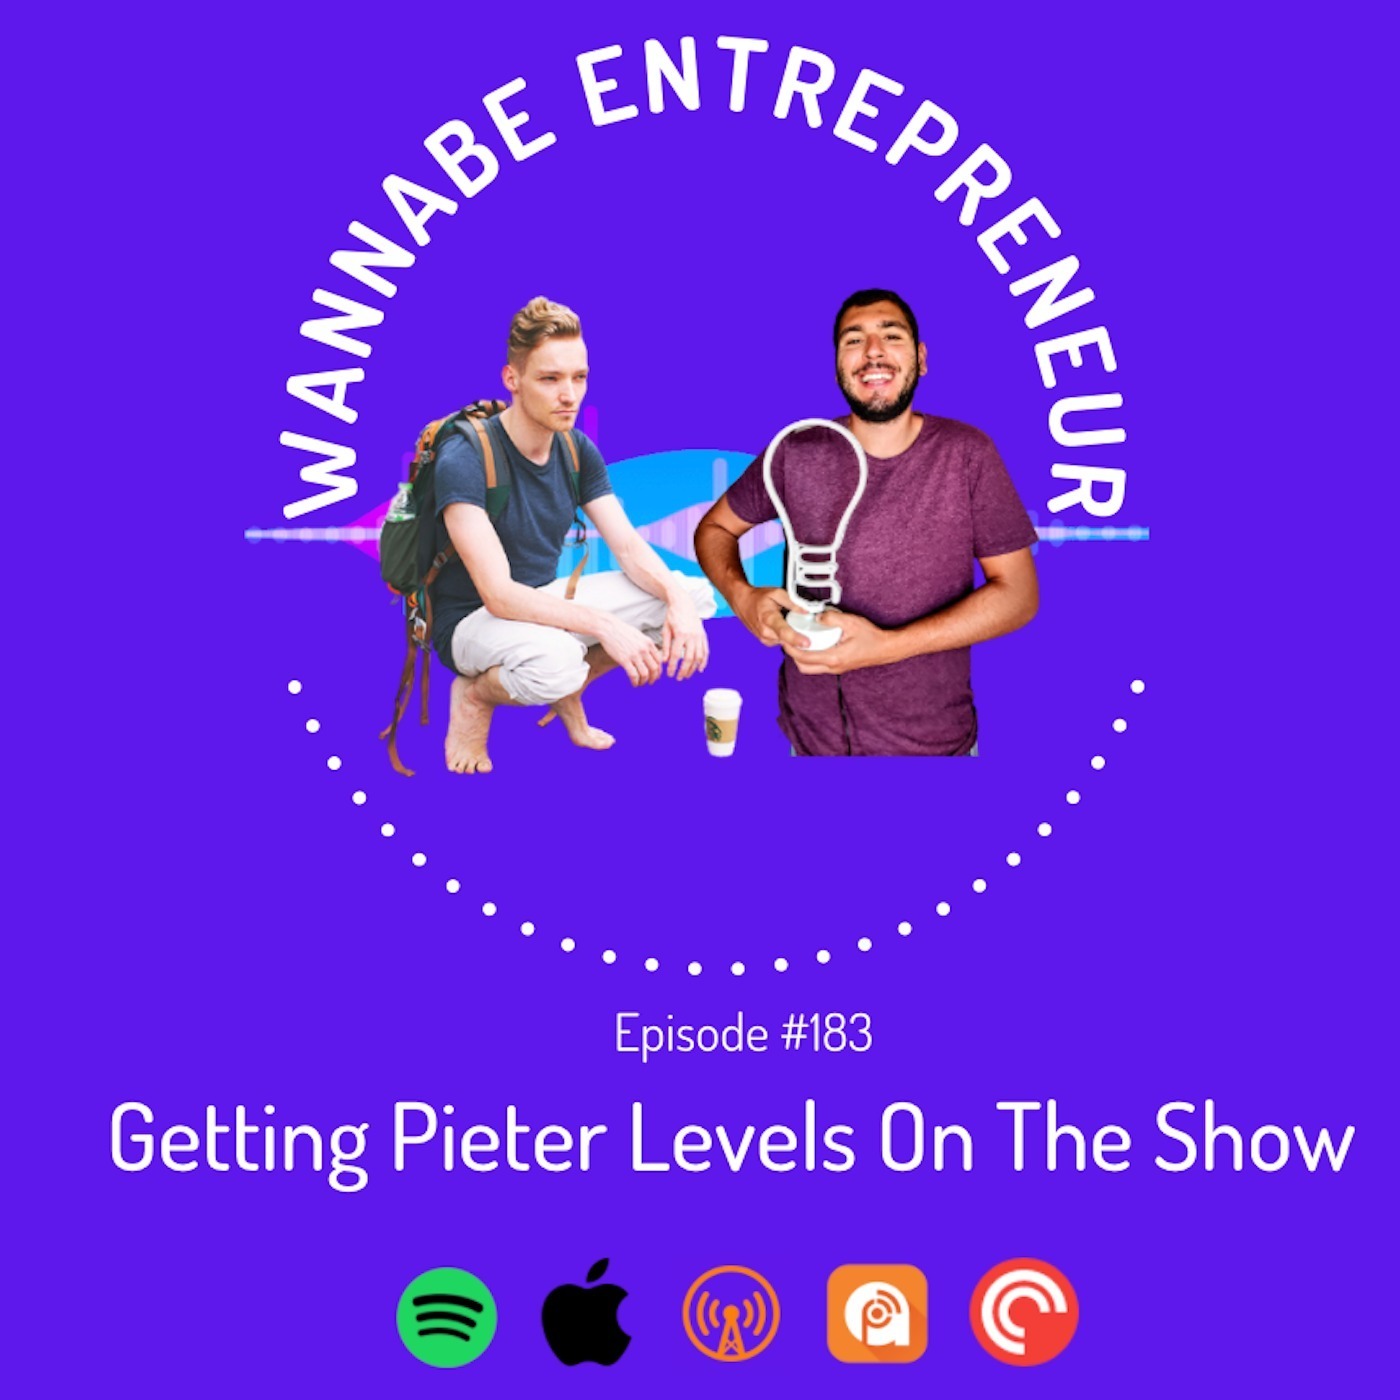 Getting Pieter Levels on the Show